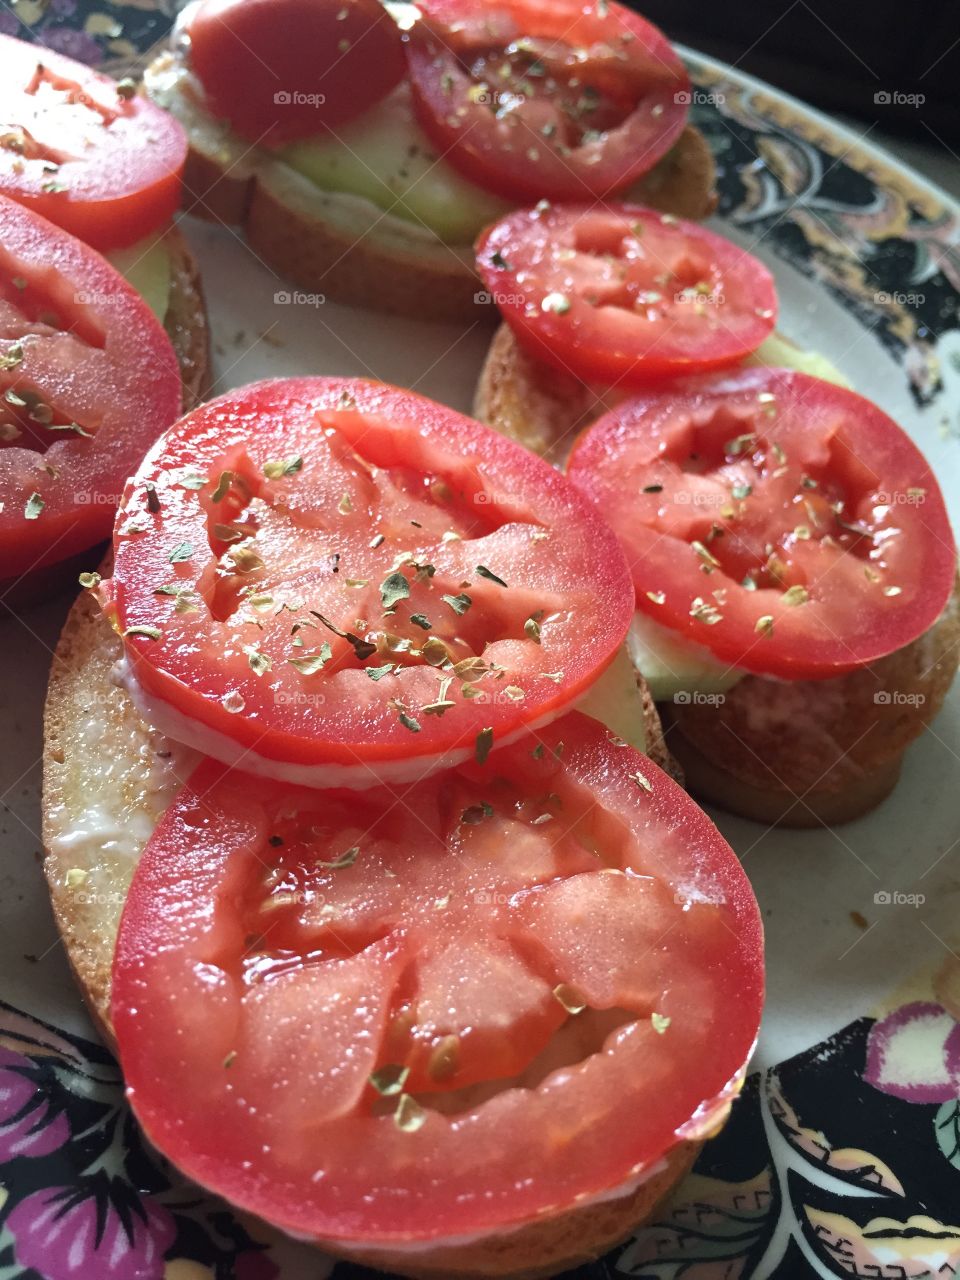 Yum. Tomatoes grown in our back yard!